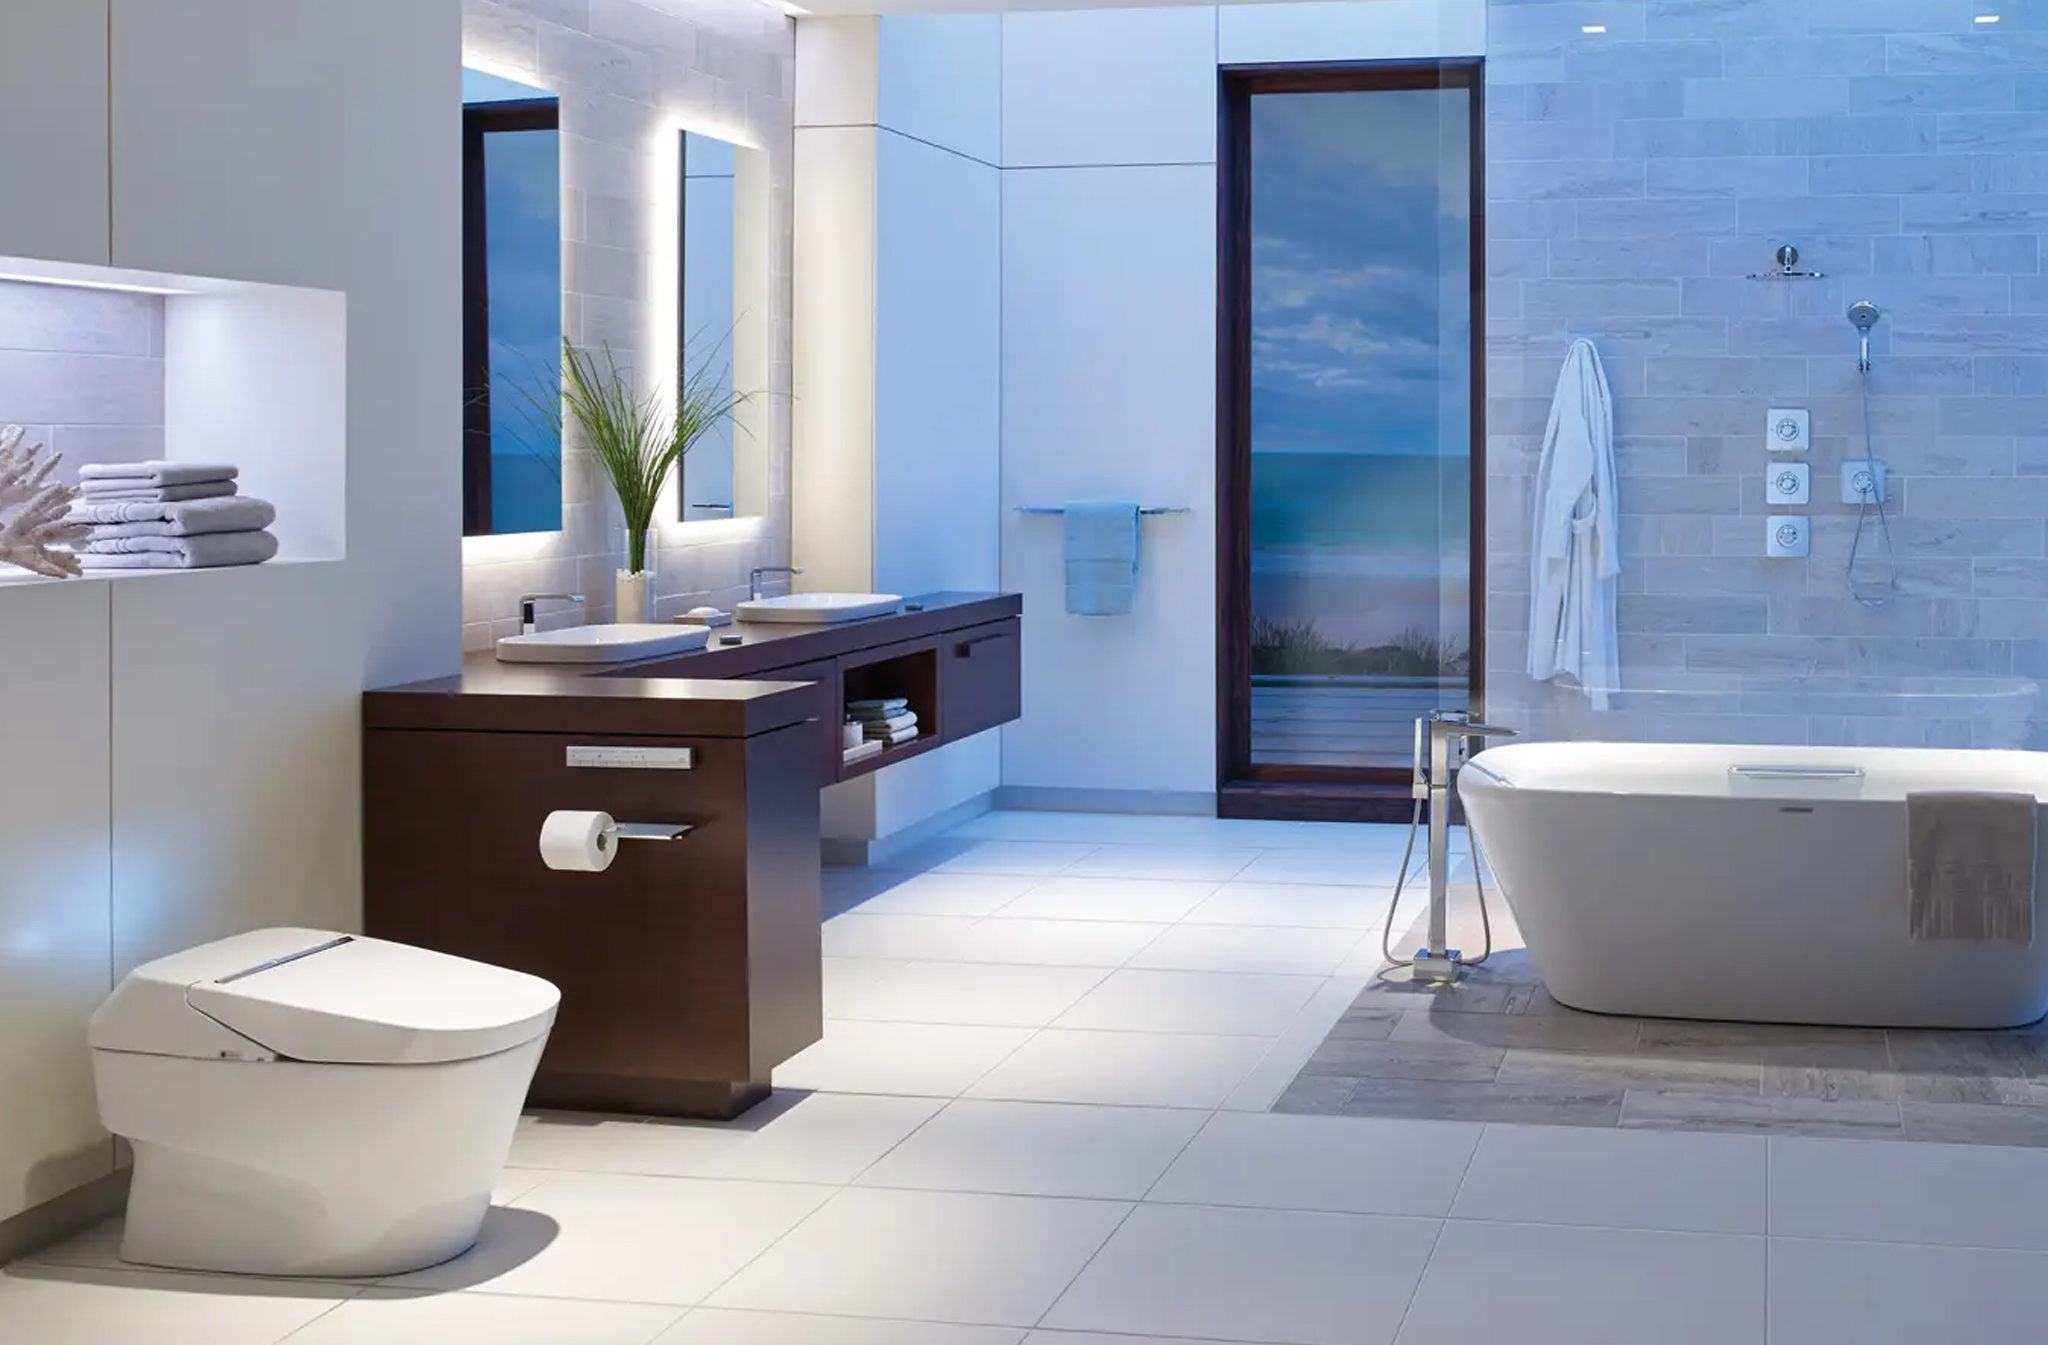 Guide to Selecting Bathroom Accessories & Fittings